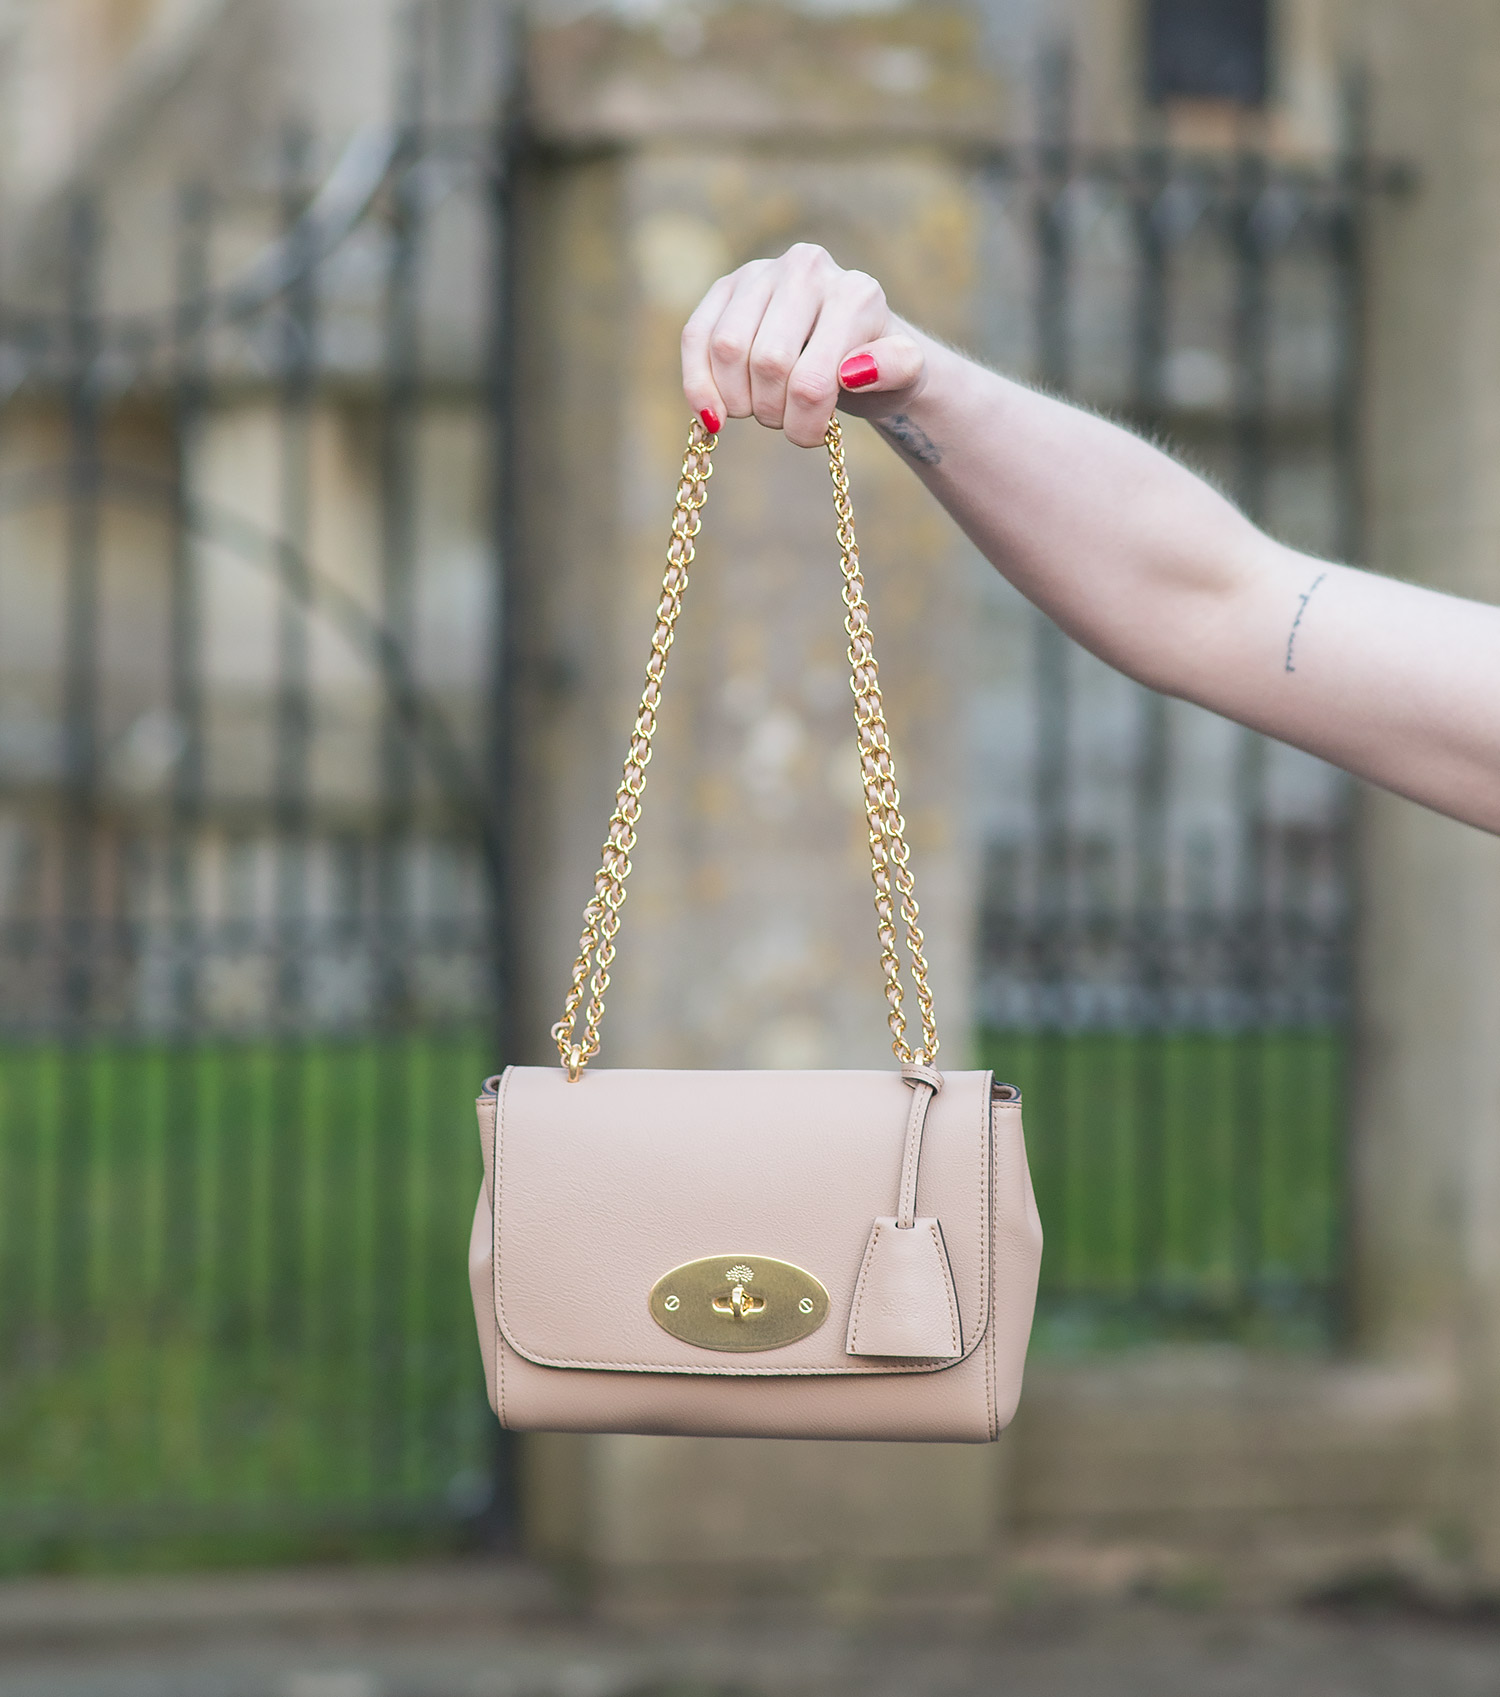 My Mulberry Lily Bag Review In Maple Silky Calf – FORD LA FEMME